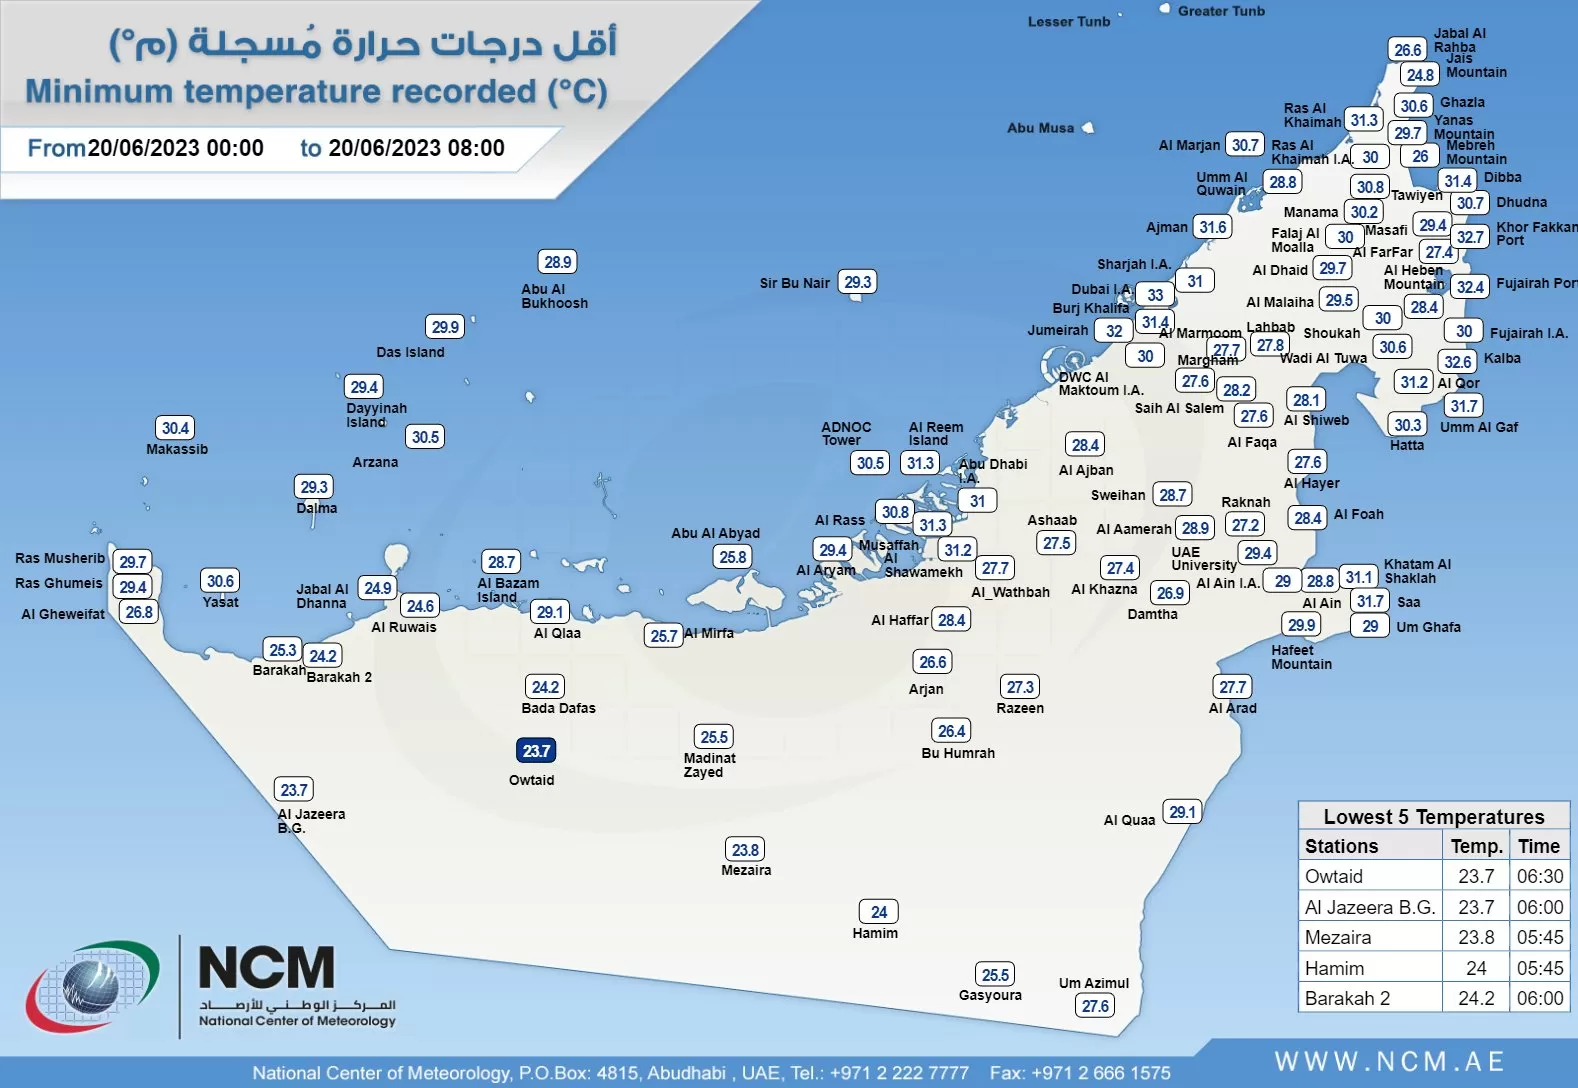 recorded over the country today morning is 23.7 °C in Owtaid (Al Dhafrah Region) at 06:30  and in Al Jazeera B.G. (Al Dhafra Region) at 06:00 UAE Local time.